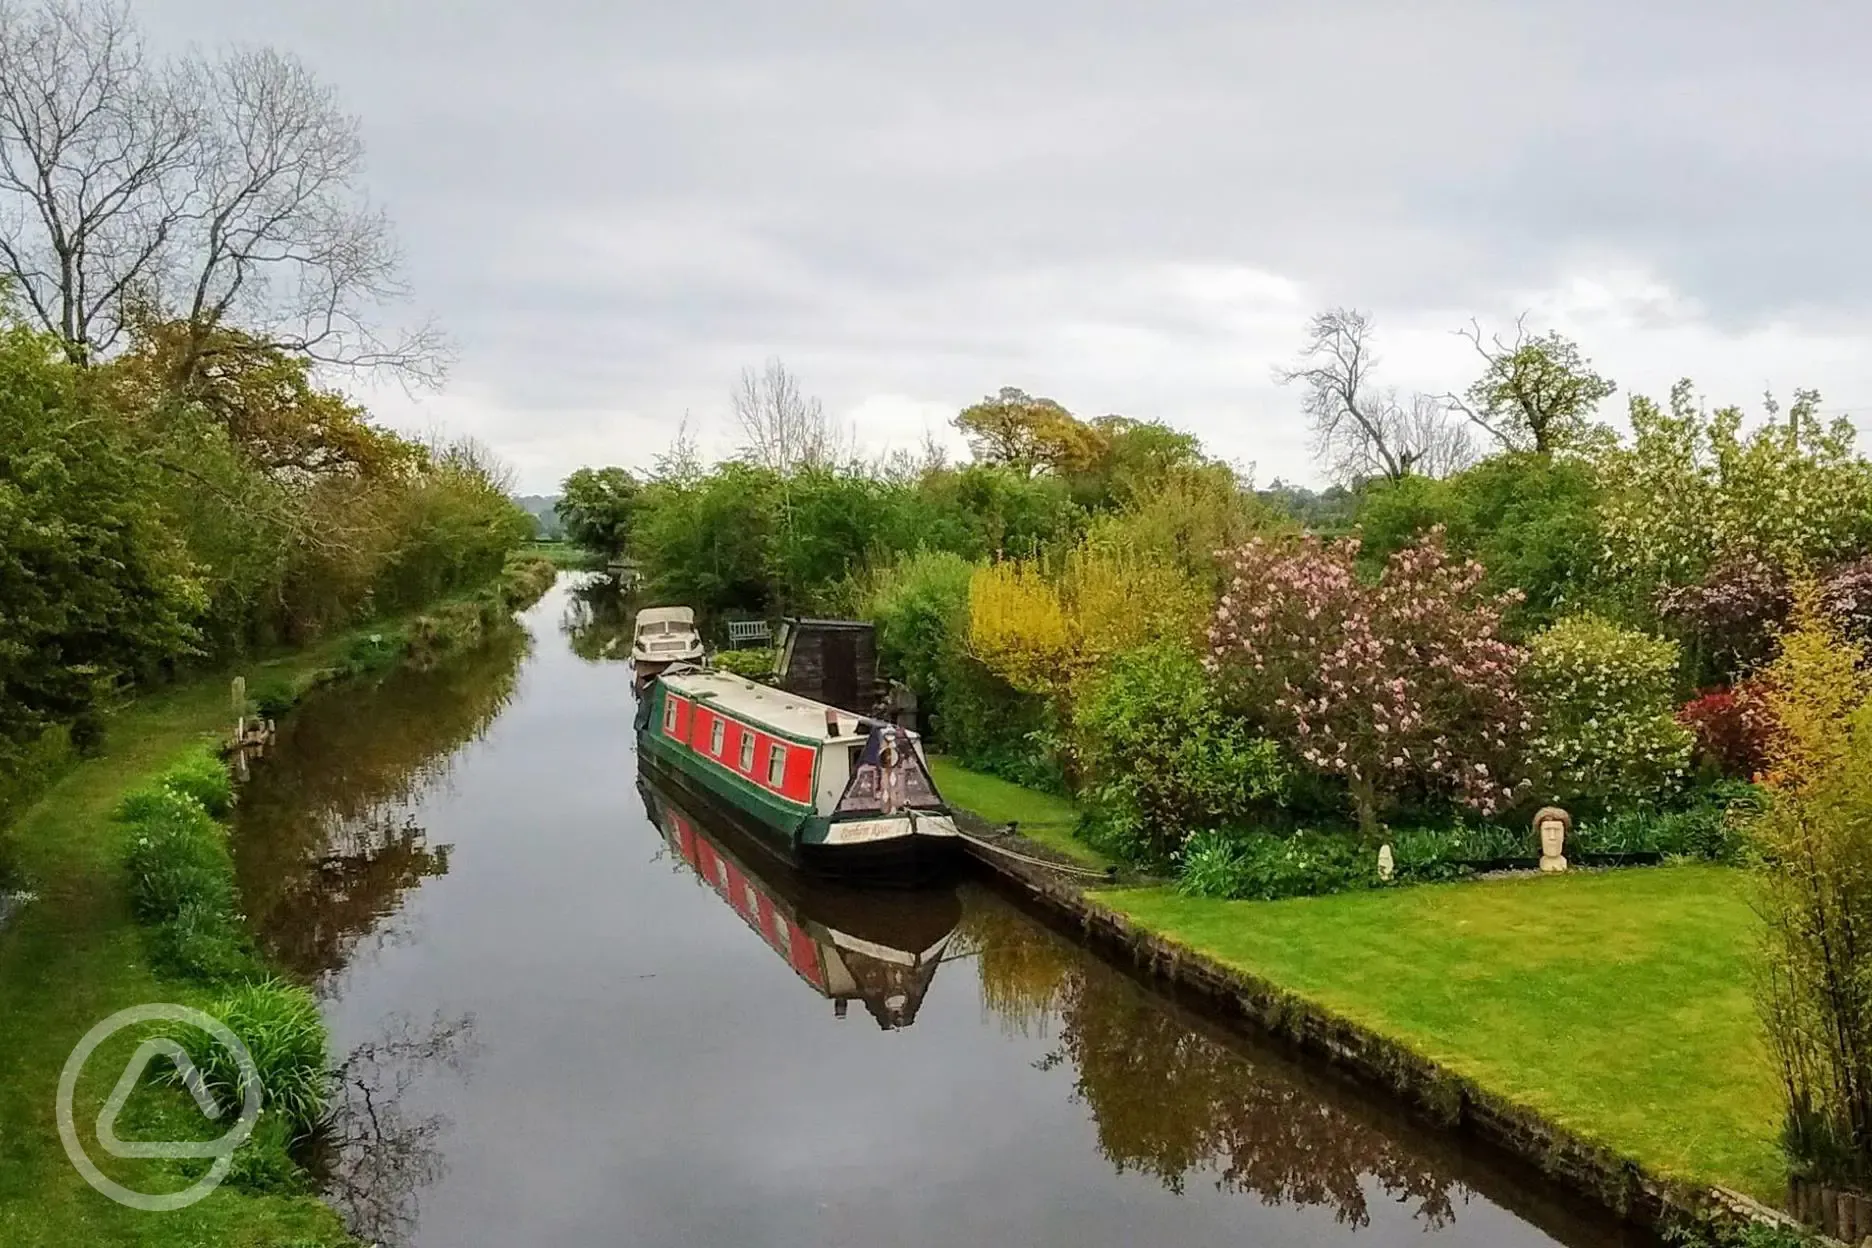 Boating on the Shropshire canals